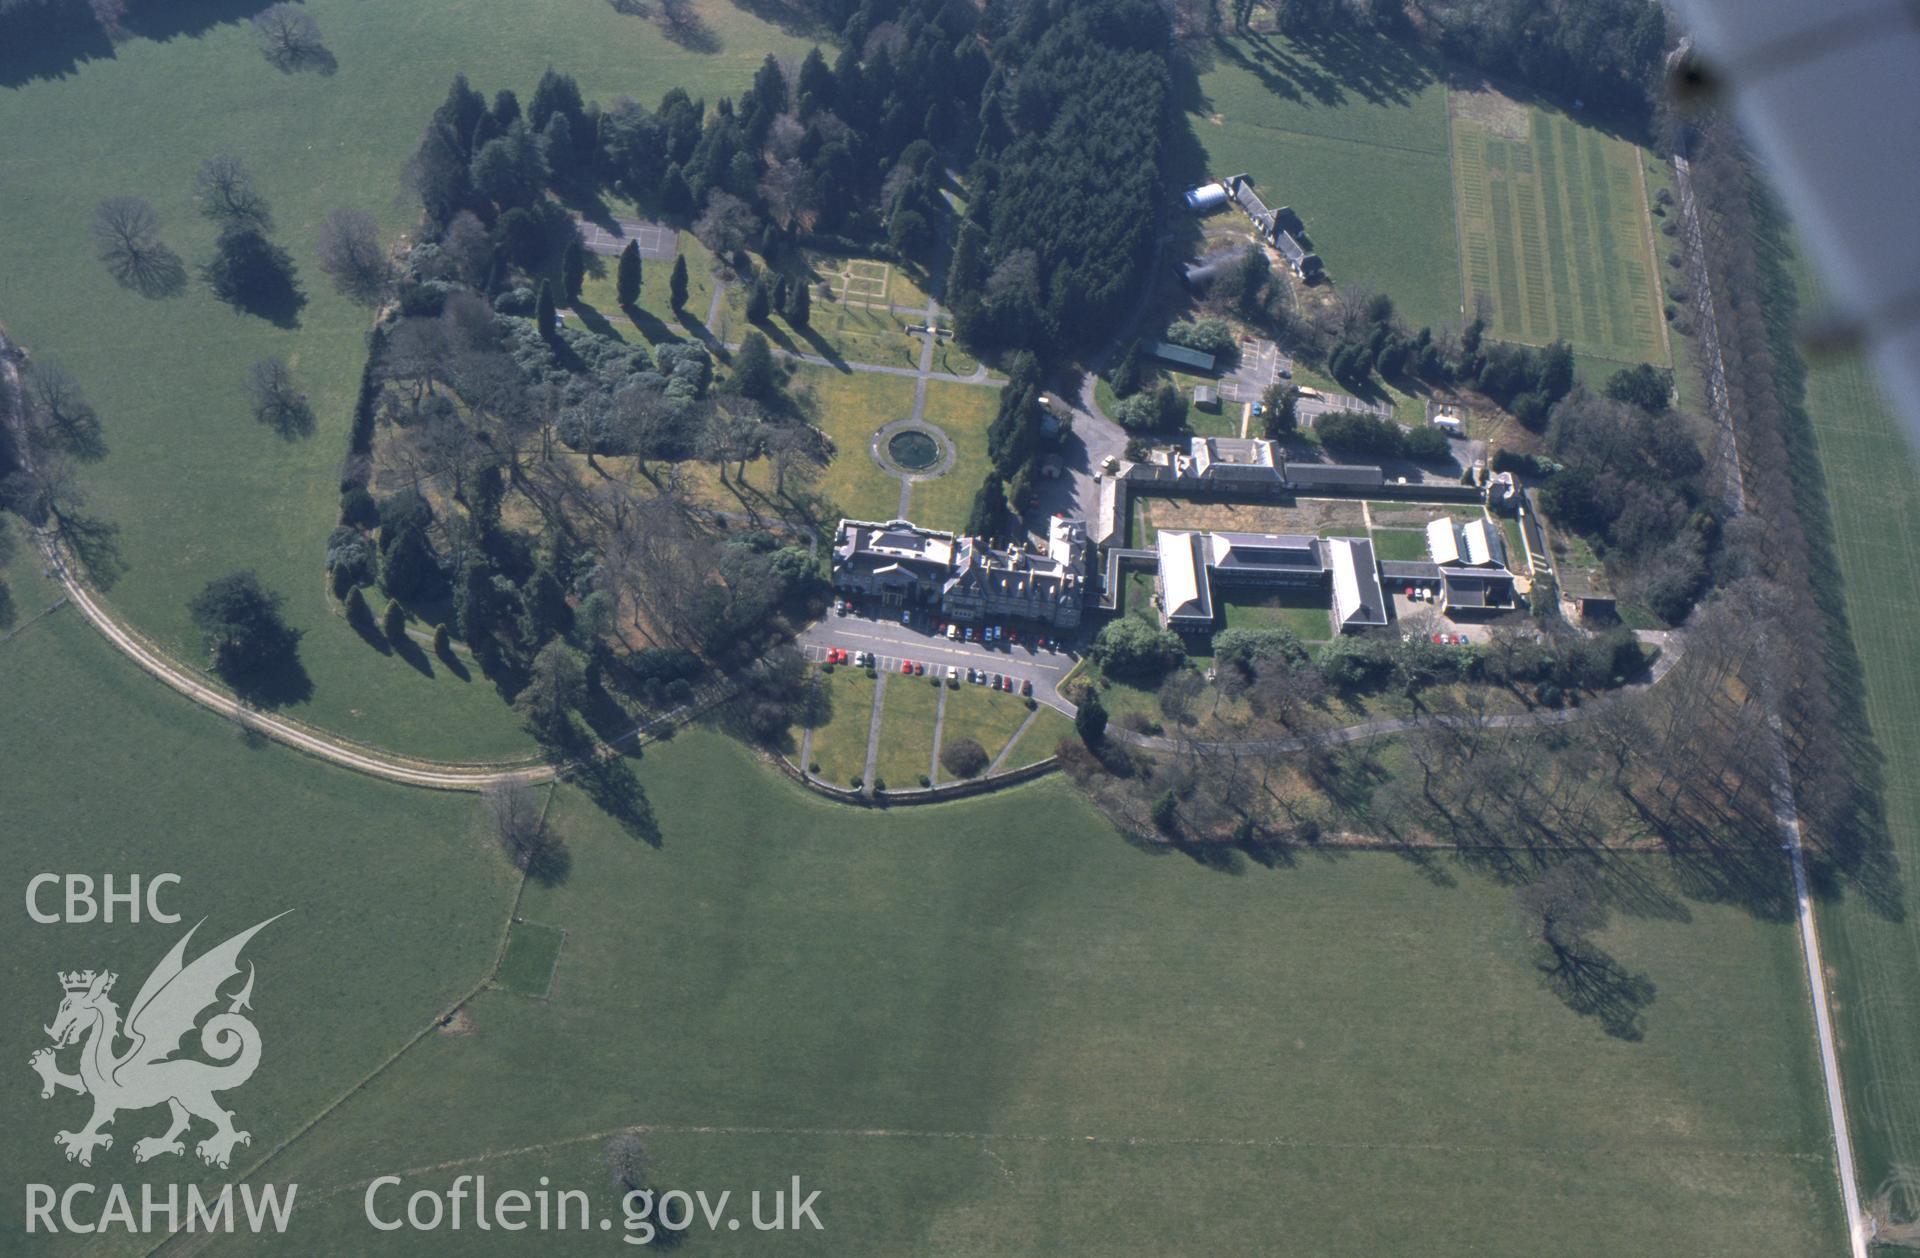 RCAHMW colour oblique aerial photograph of Trawsgoed Mansion. Taken by C R Musson on 23/03/1995